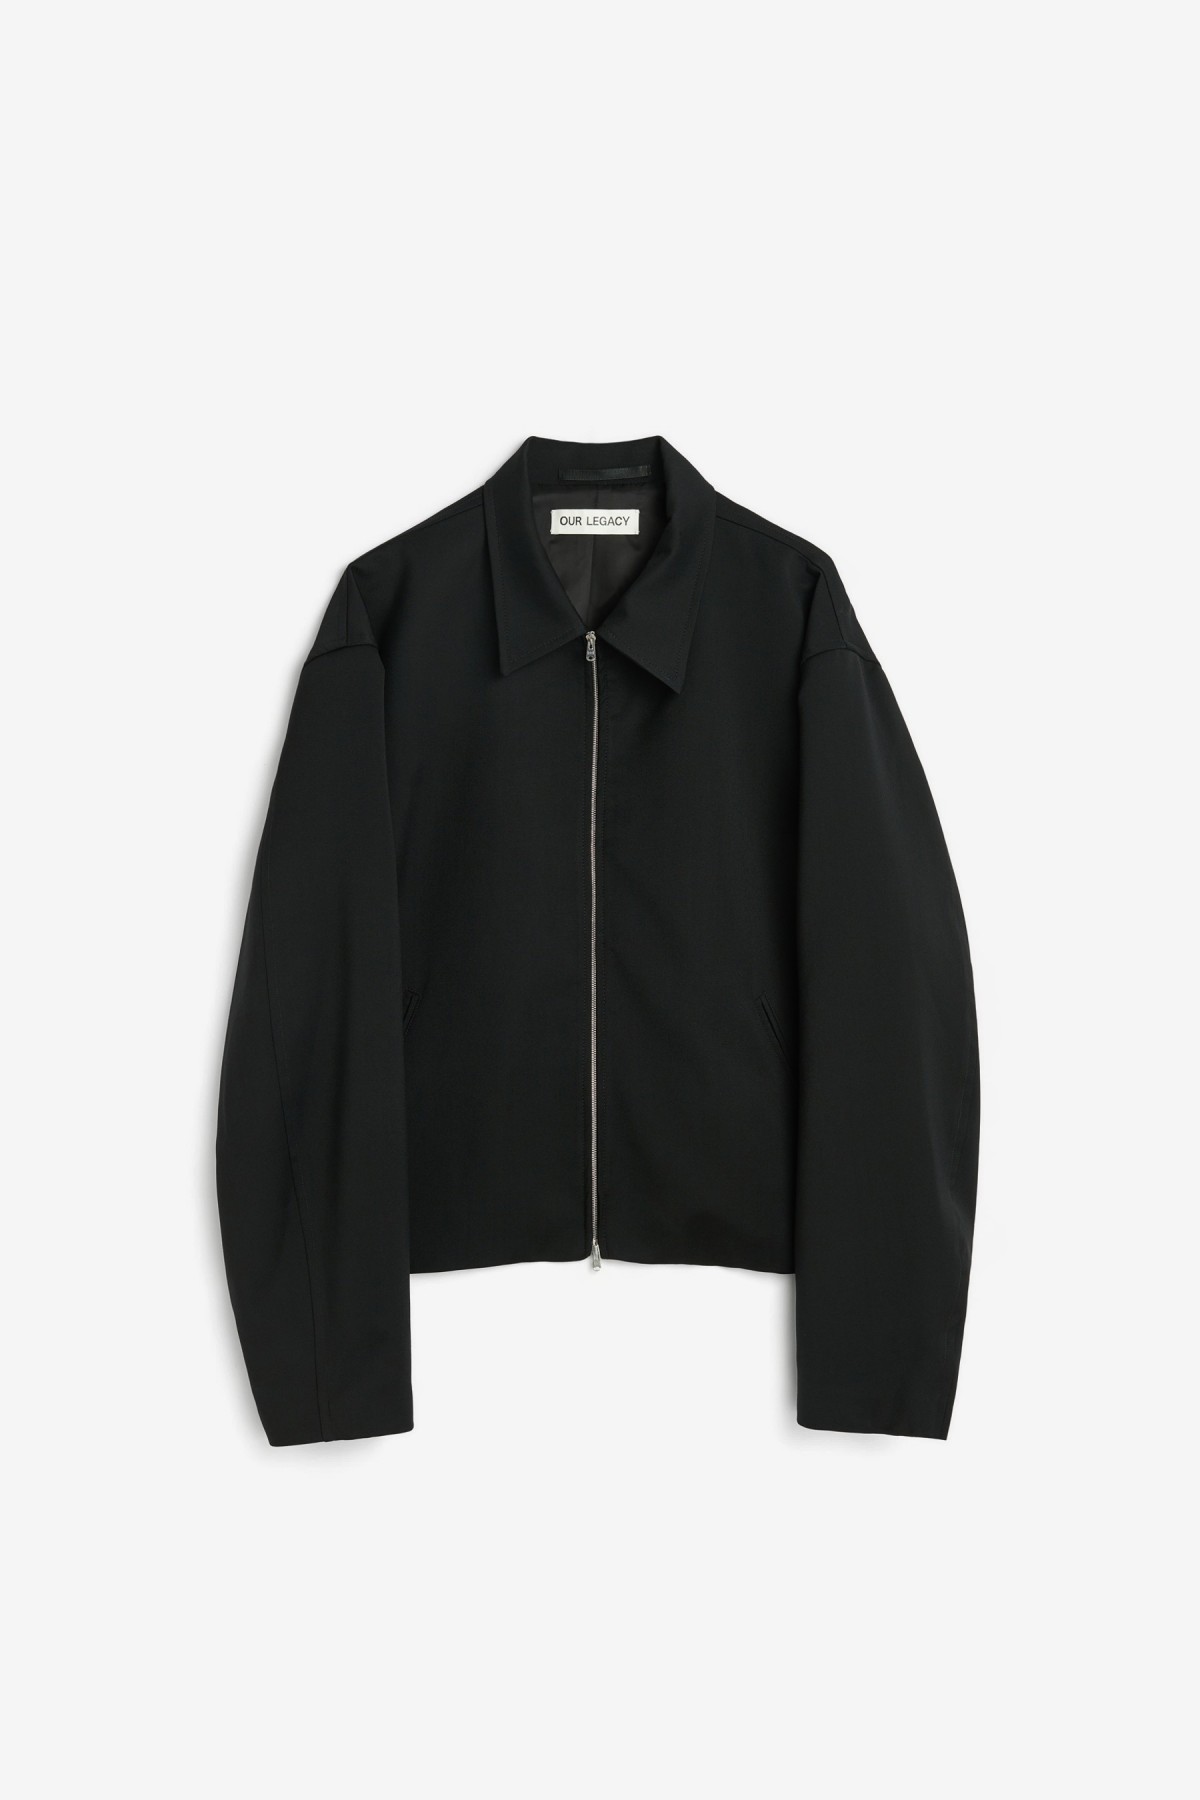 Our Legacy Mini Jacket in Black Worsted Wool